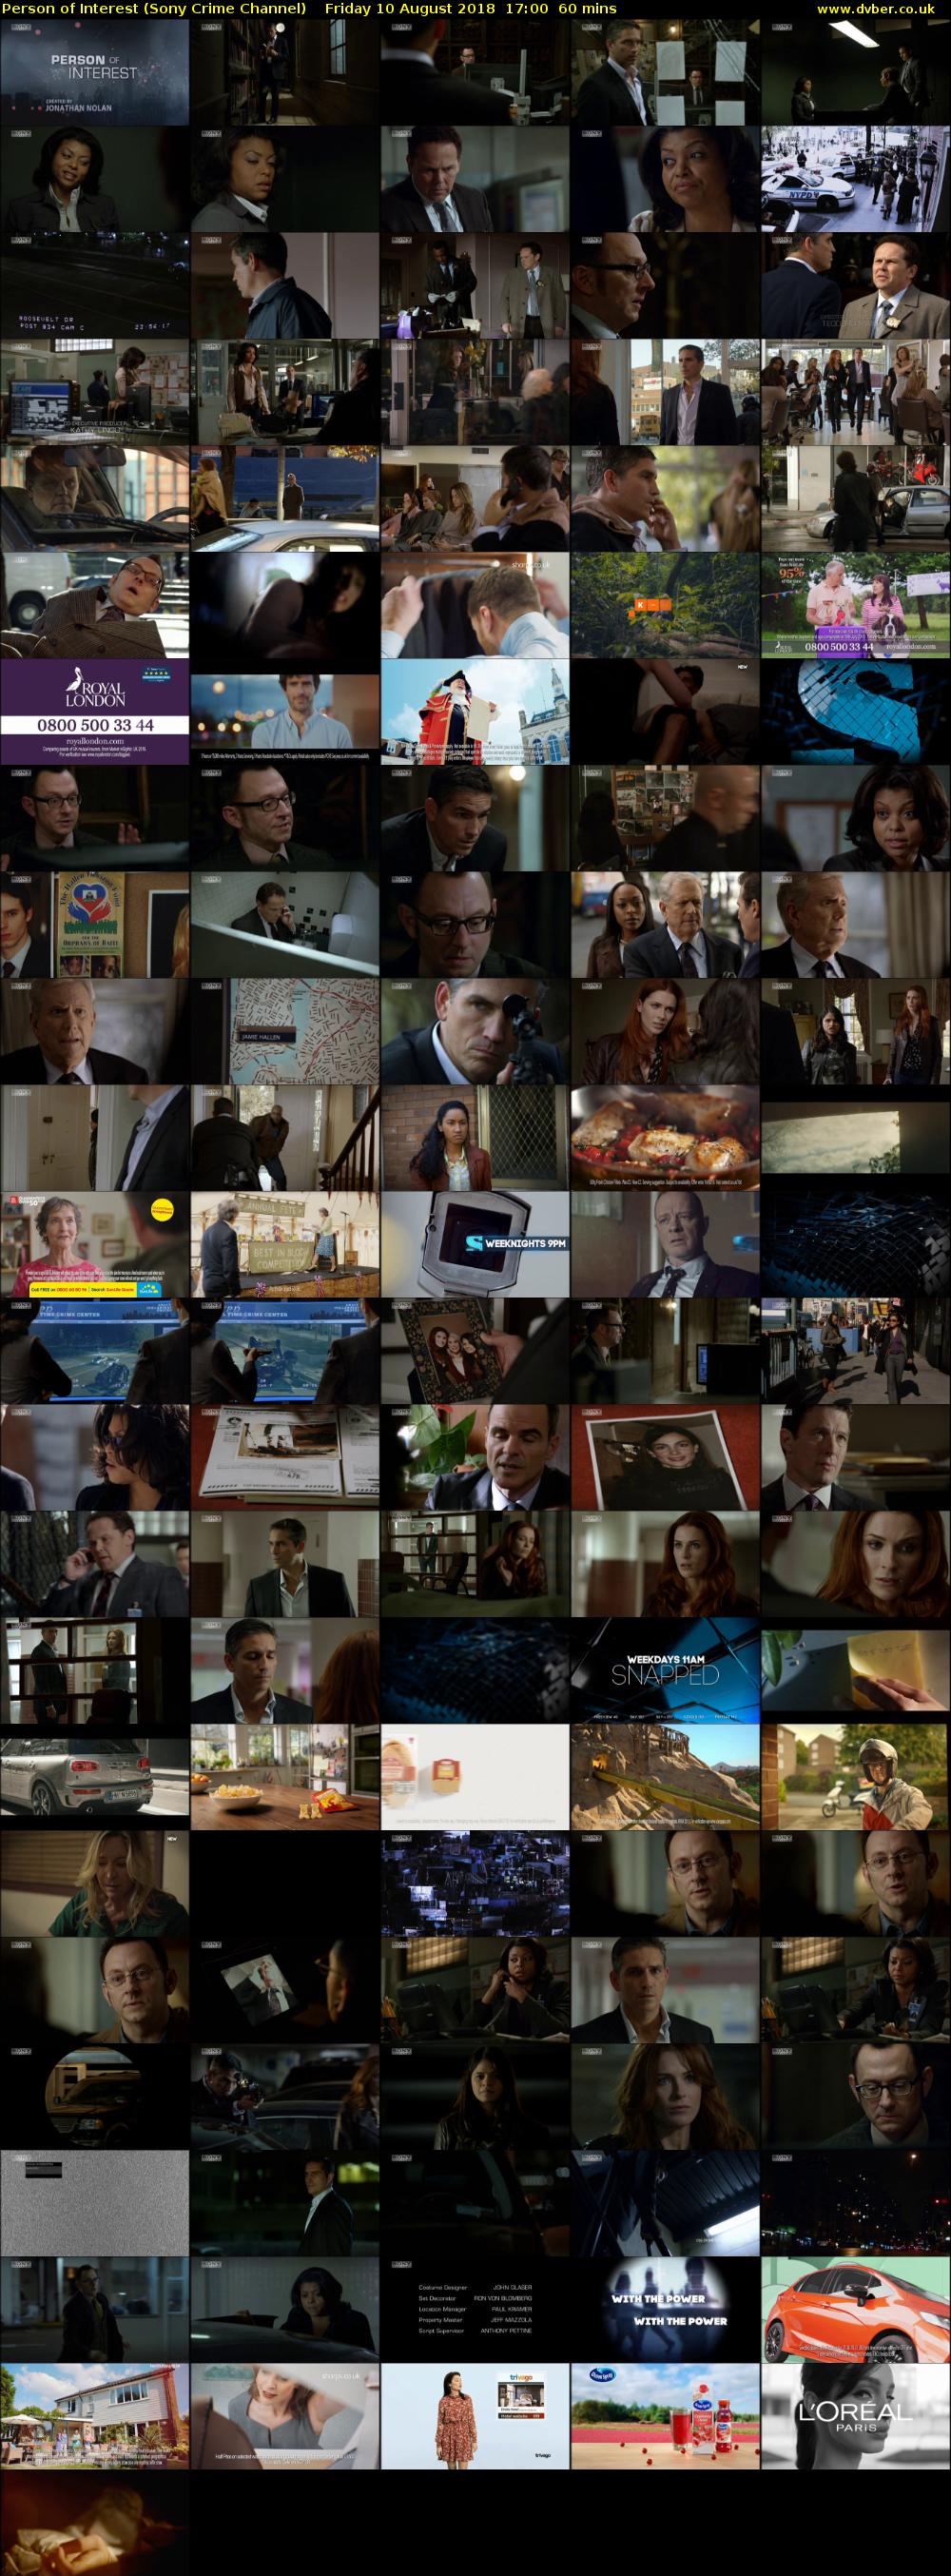 Person of Interest (Sony Crime Channel) Friday 10 August 2018 17:00 - 18:00